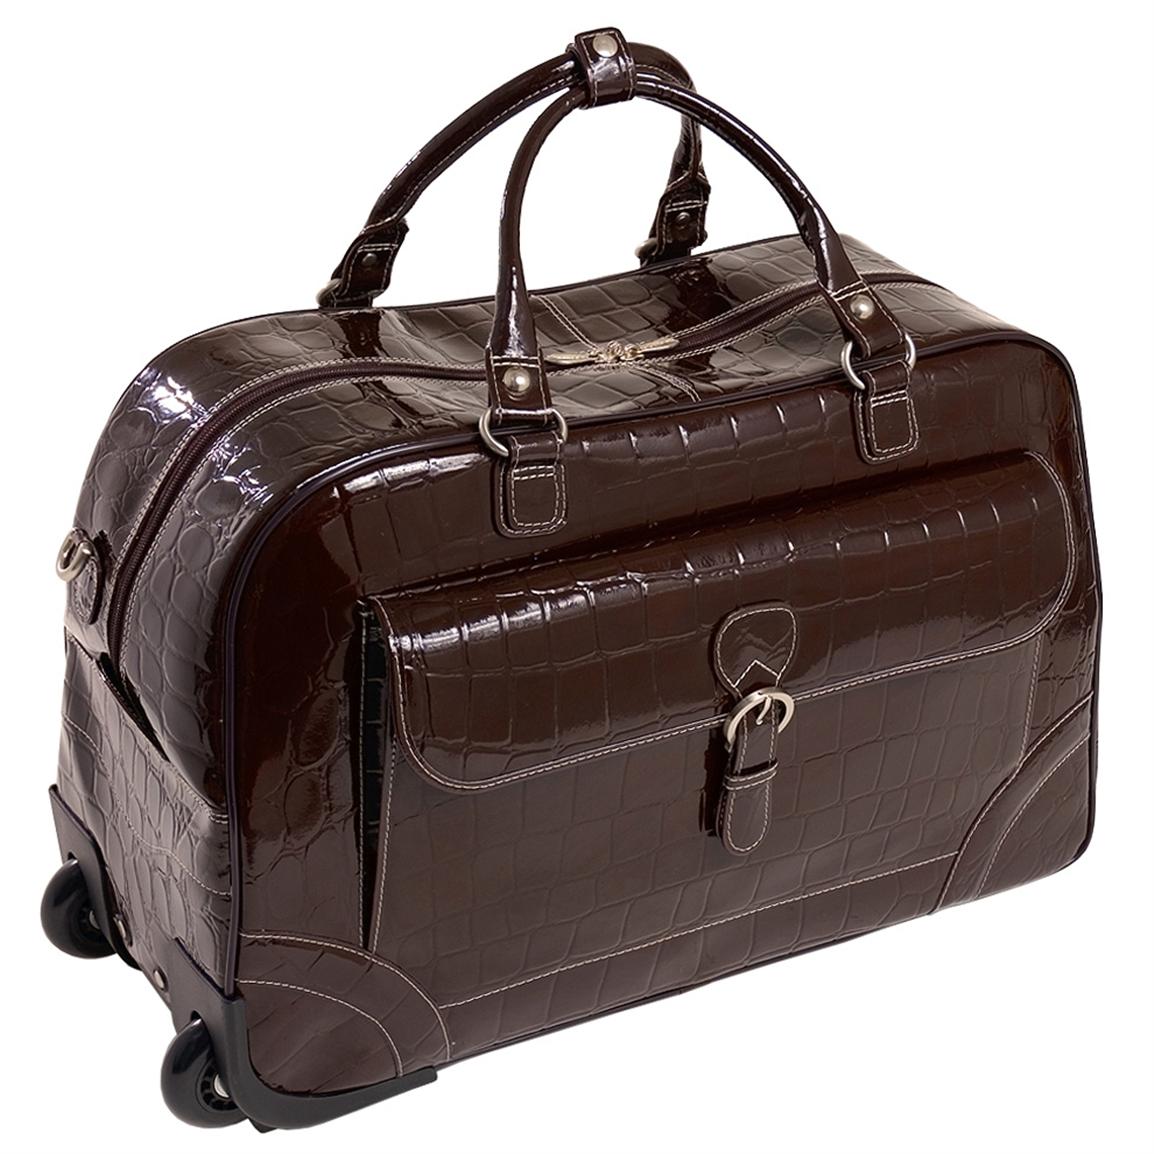 Best Leather Duffle Bag With Wheels | Literacy Ontario Central South